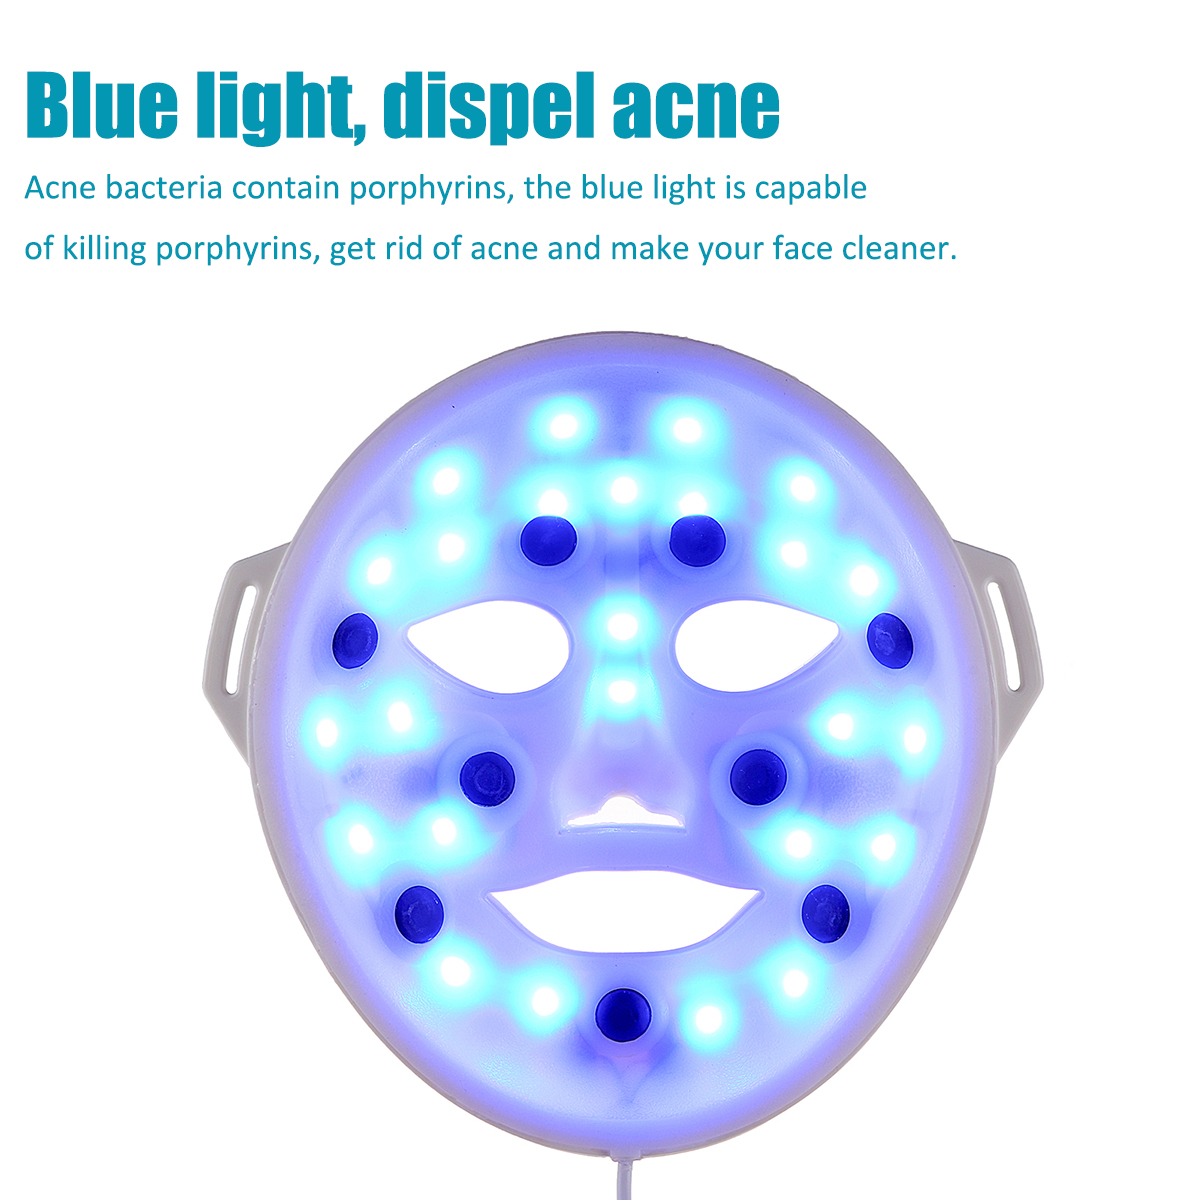 LED-Photon-Therapy-Facial-Mask-3-Colors-Vibration-Skin-Massager-Beauty-Face-Tool-1940393-6